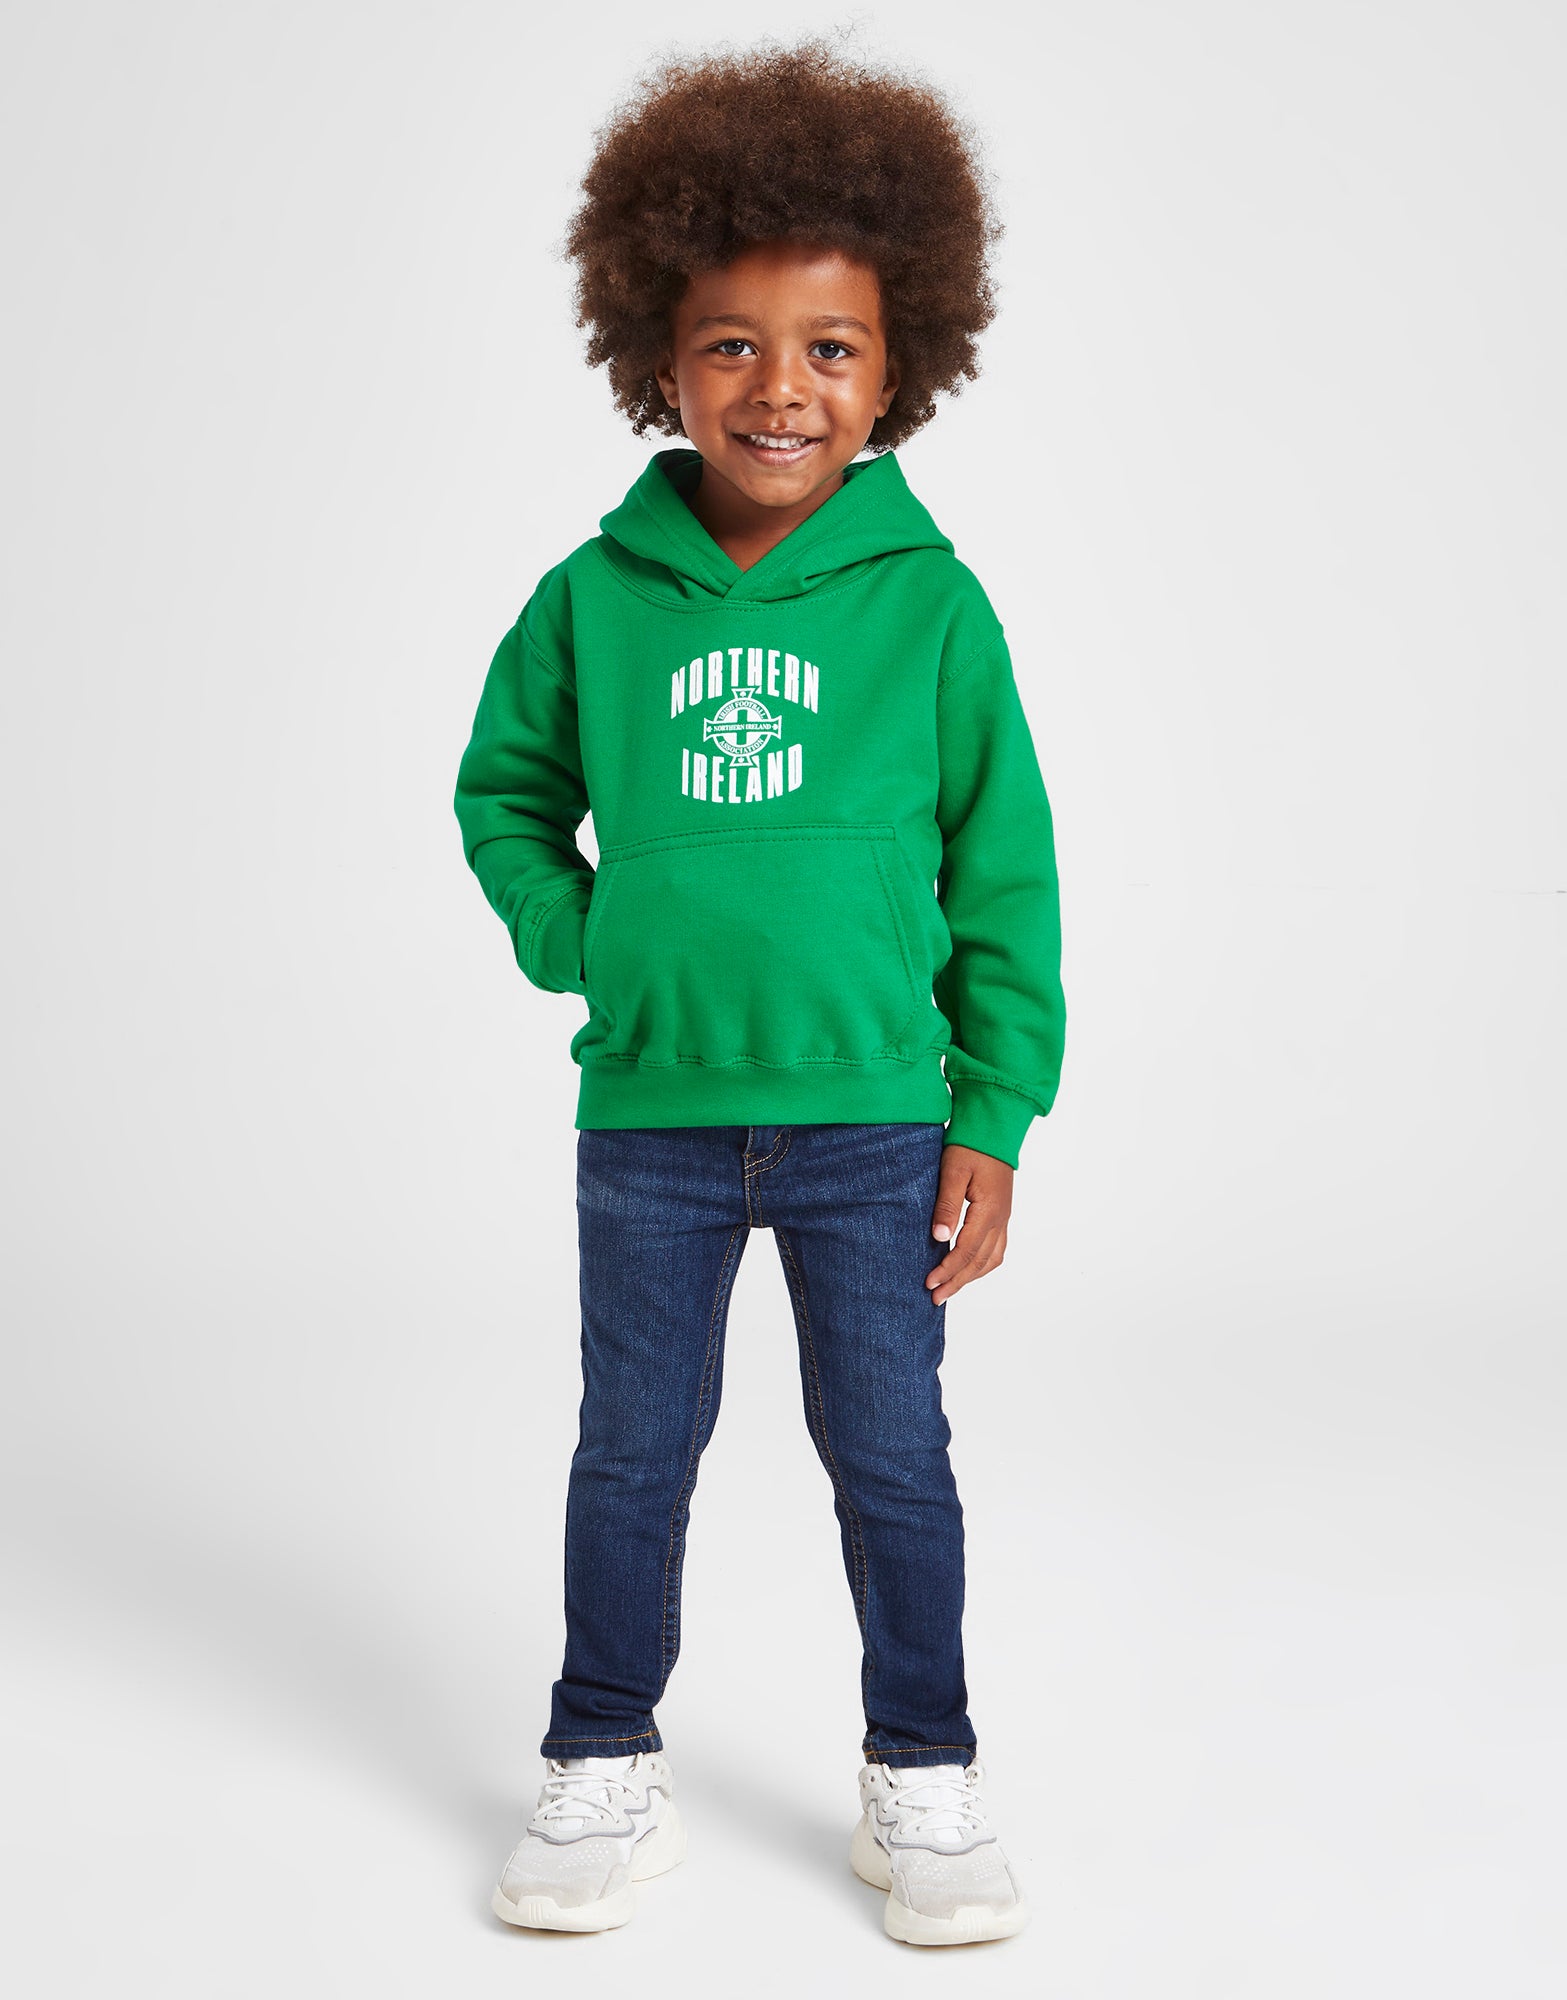 Official Northern Ireland Crest Hoodie Kids - Green - The World Football Store